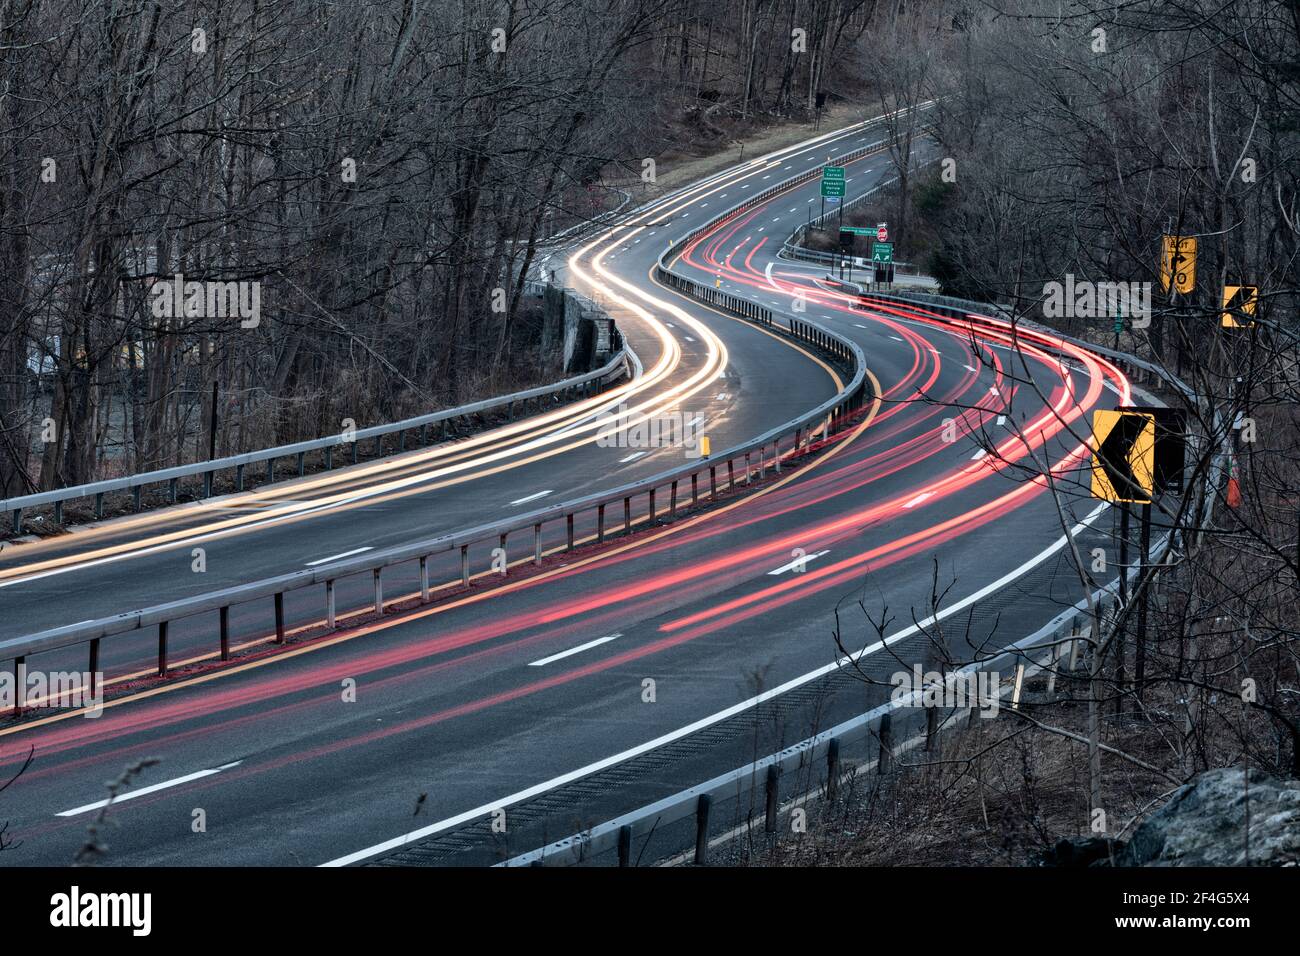 Rush hour traffic blurred by a slow camera shutter speed on the Taconic State Parkway in Putnam County, New York. Stock Photo